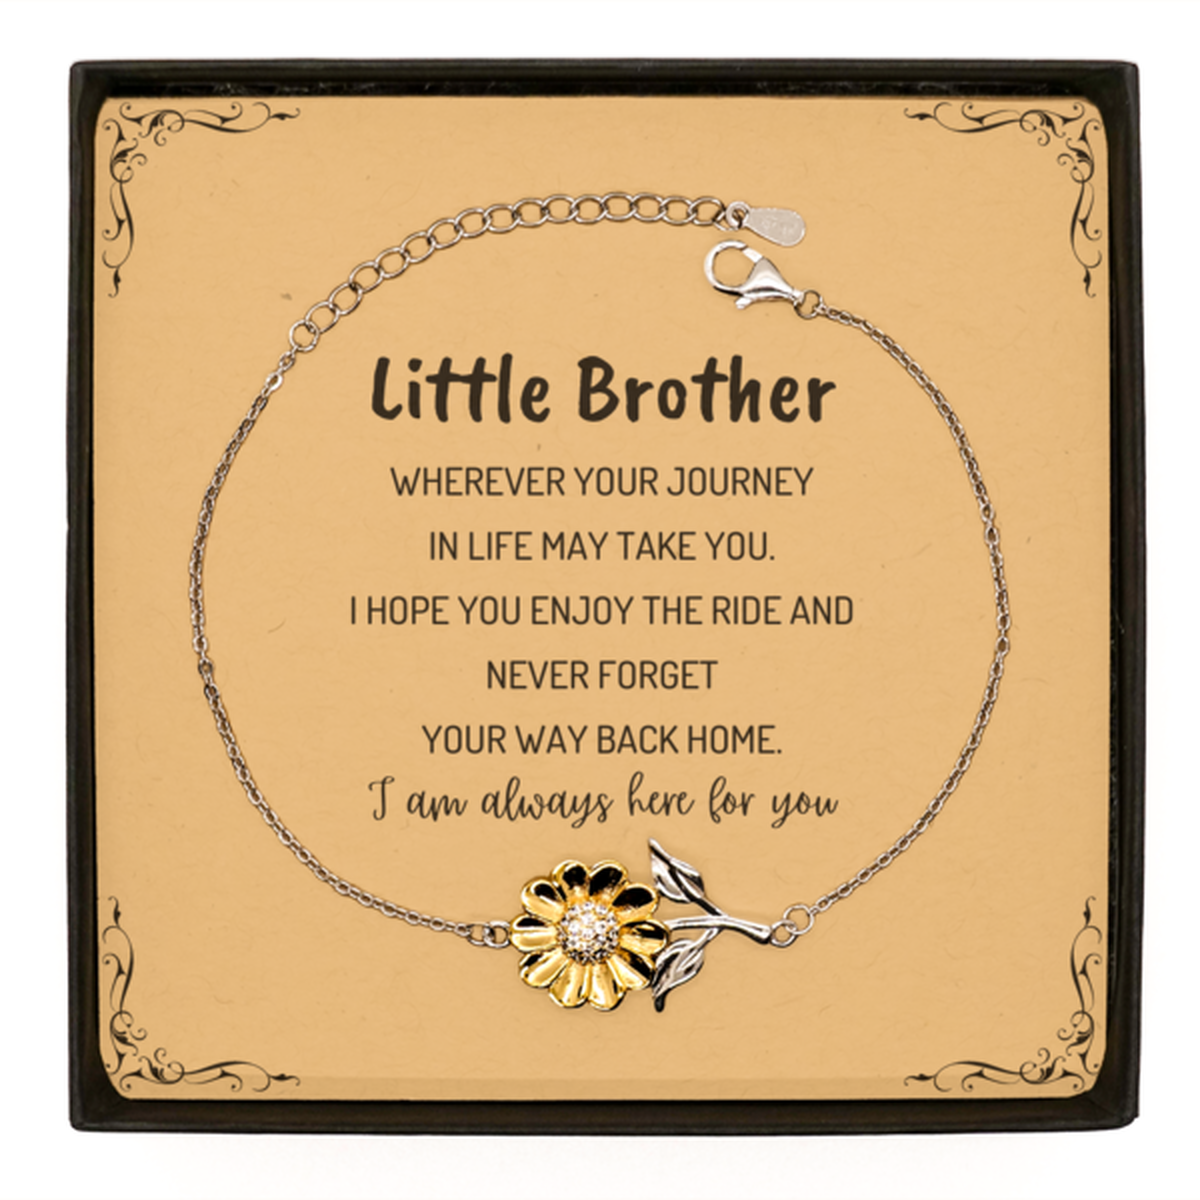 Little Brother wherever your journey in life may take you, I am always here for you Little Brother Sunflower Bracelet, Awesome Christmas Gifts For Little Brother Message Card, Little Brother Birthday Gifts for Men Women Family Loved One